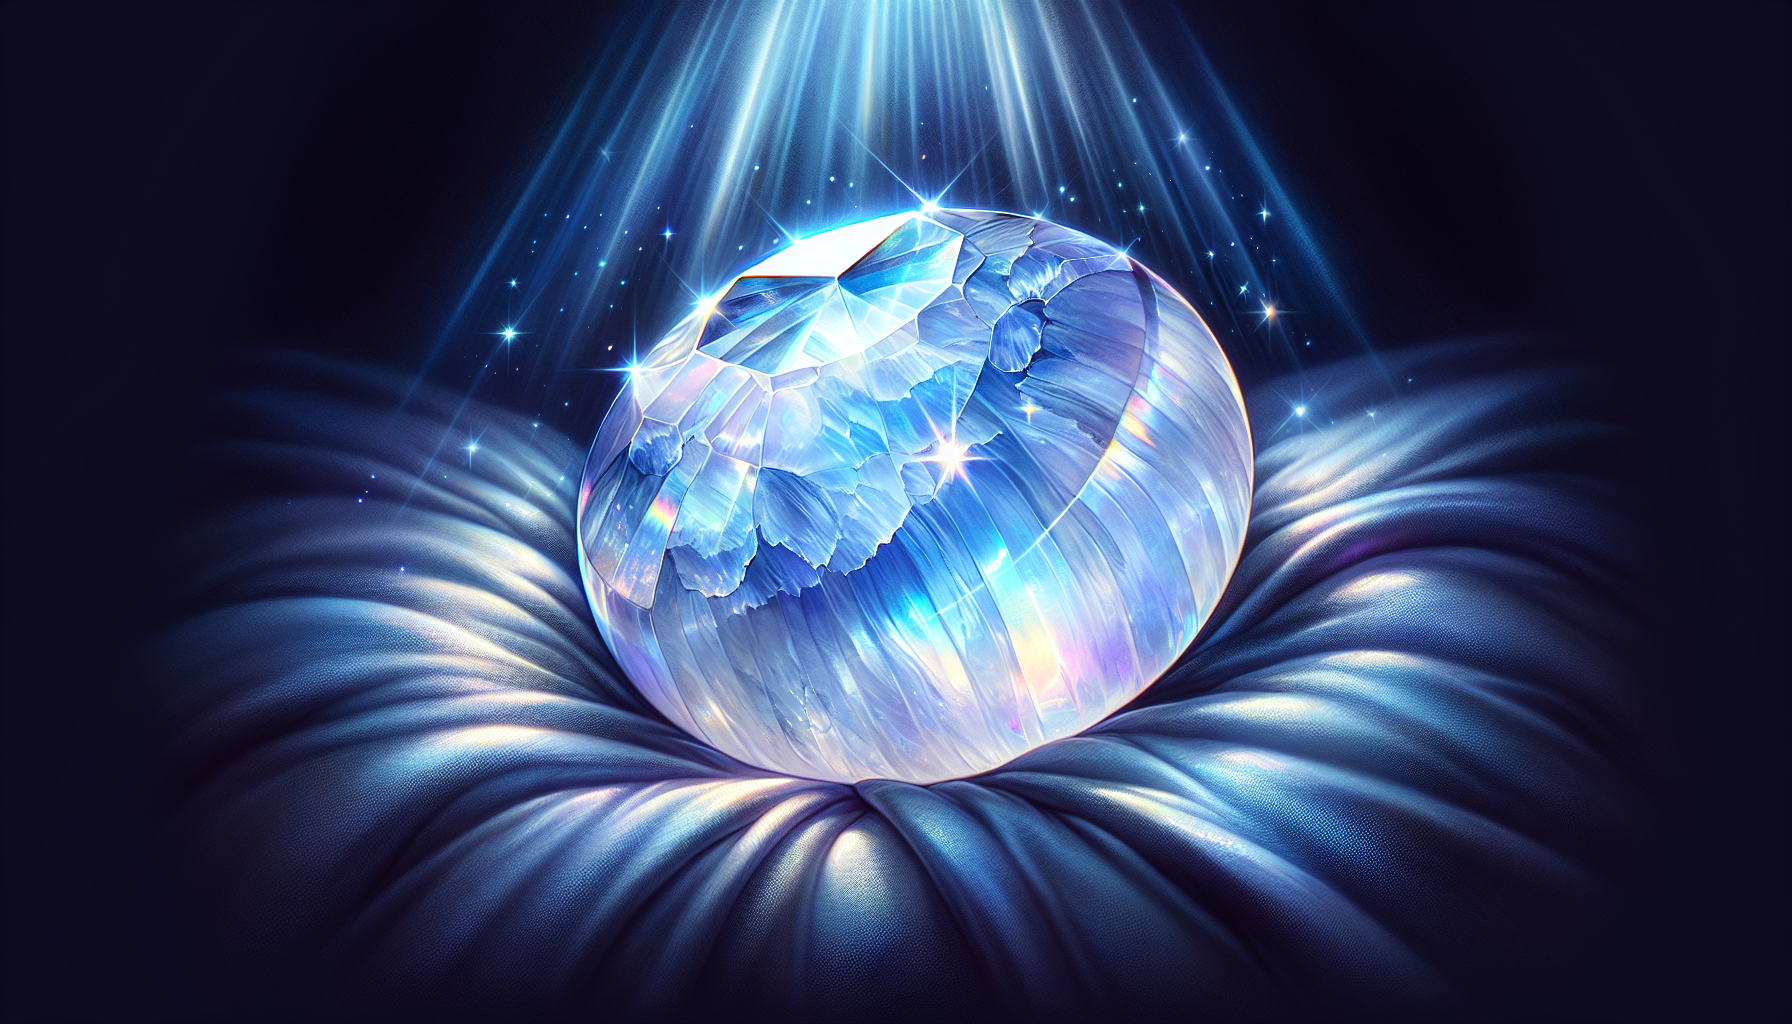 Illustration of a glowing moonstone reflecting light